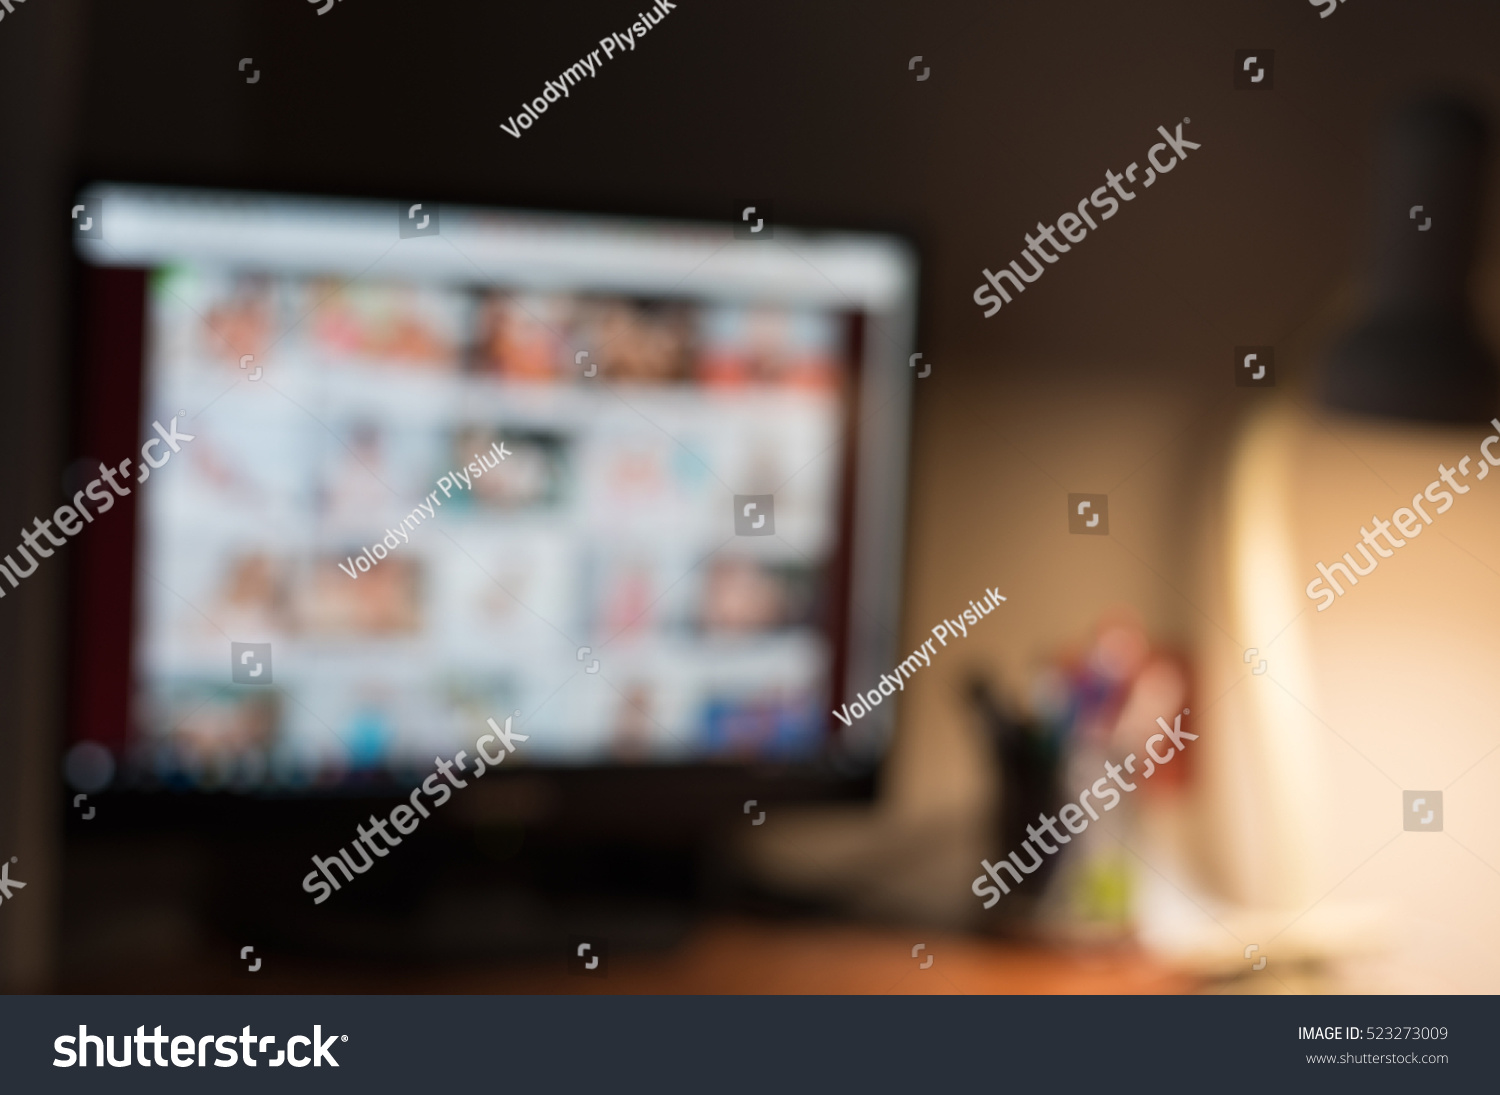 Stock Photo Porn Site Adult Content Only Online Porn Concept Sex And Sites Porn Site Theme Creative 7